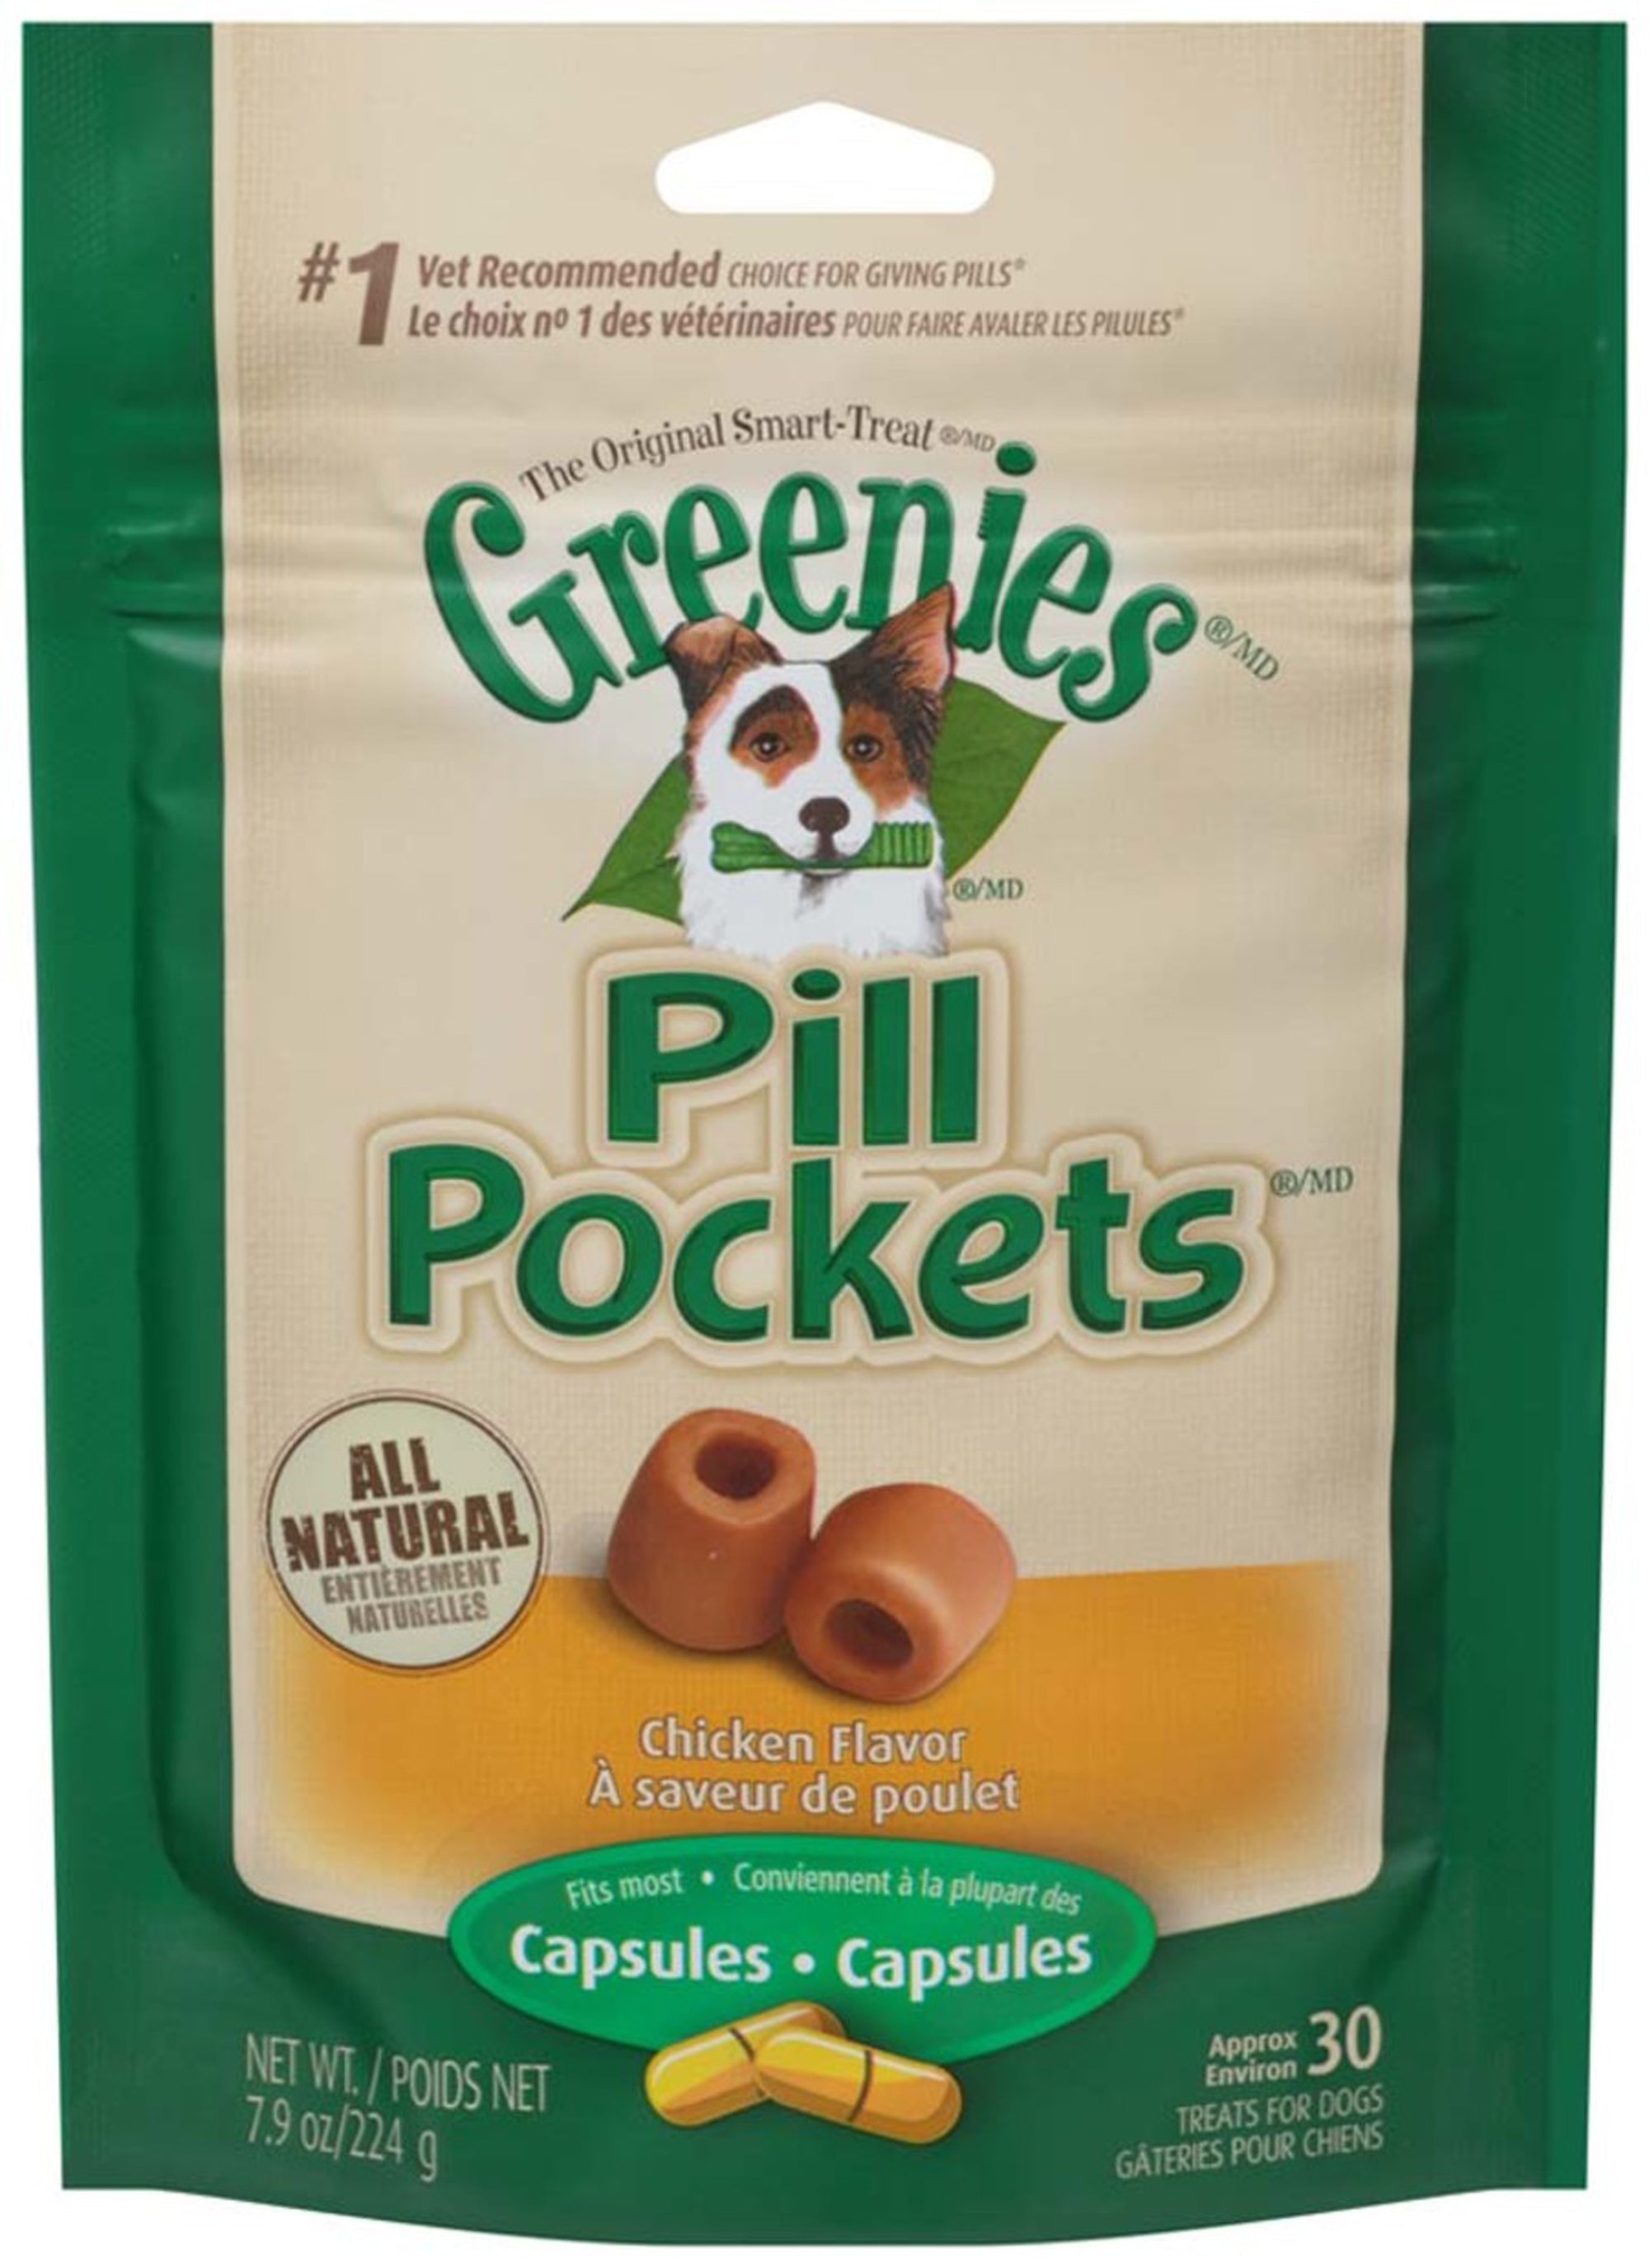 Greenies Pill Pockets for Capsules Chicken 1ea/30 ct, 7.9 oz